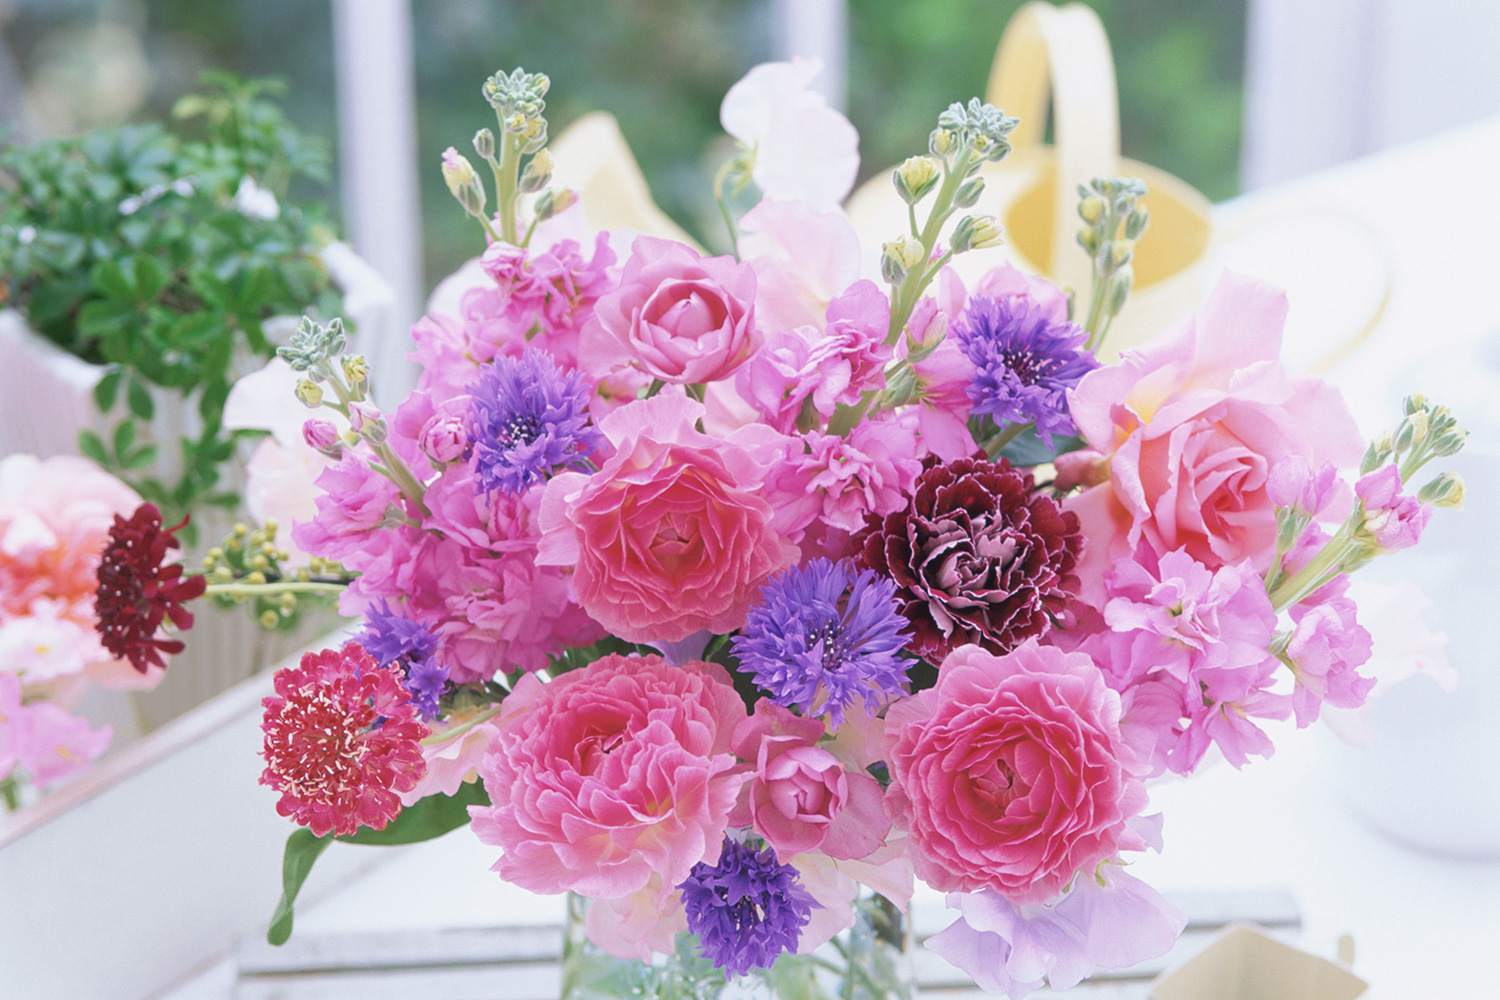 Order Flowers for a Special Event: Tips and Tricks for Choosing the Perfect Bouquet